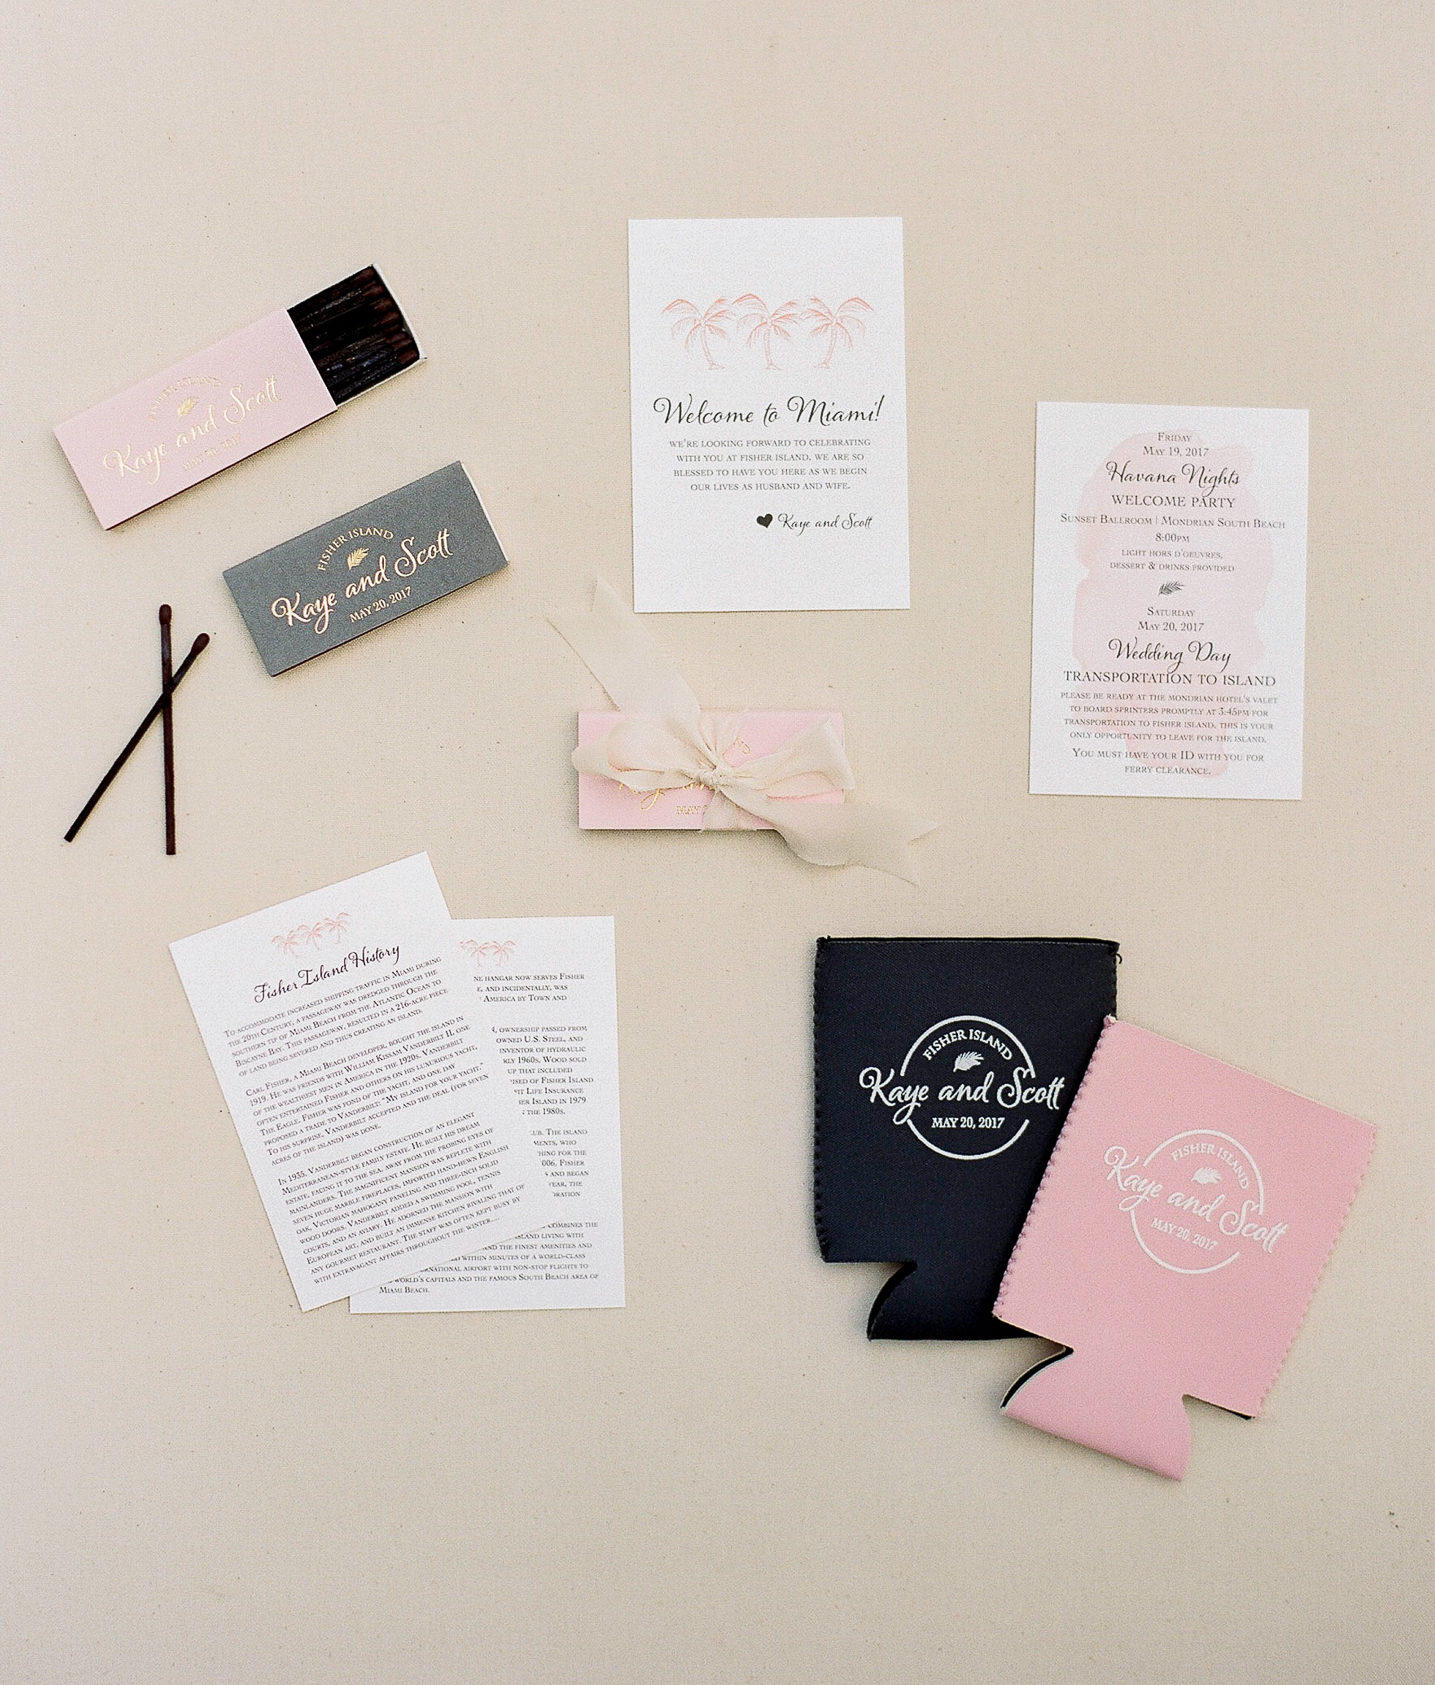 The welcome bags were filled with custom match boxes and matching custom koozies in the wedding colors of pink and gray